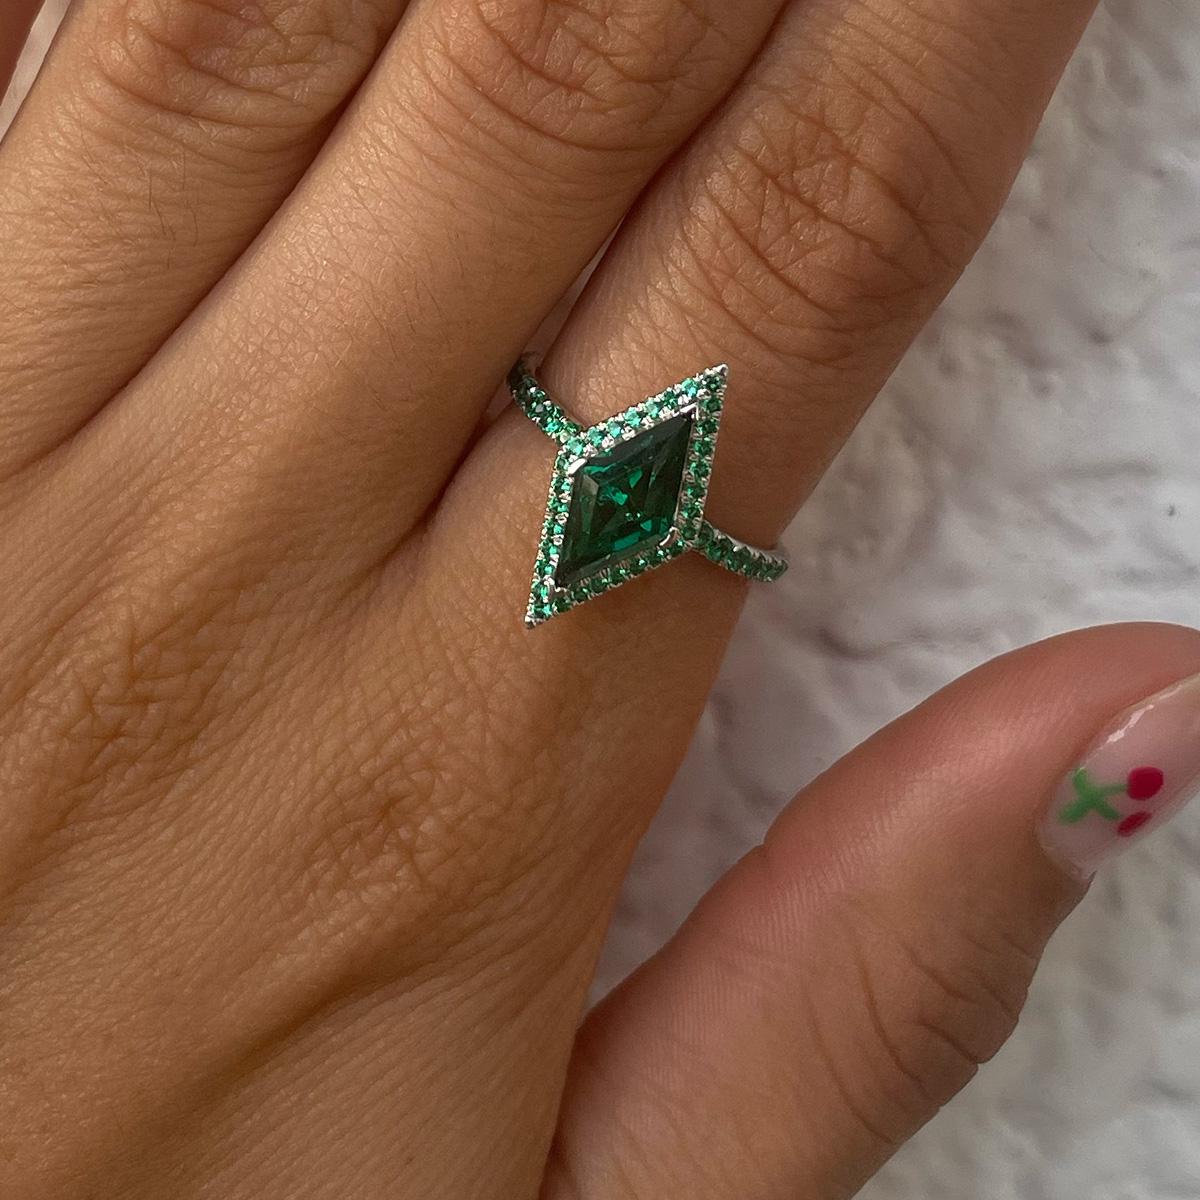 For Sale:  1.50 Carat Emerald Lozenge Ring, Green, Round Emerald Pave, 18kt White Gold 5